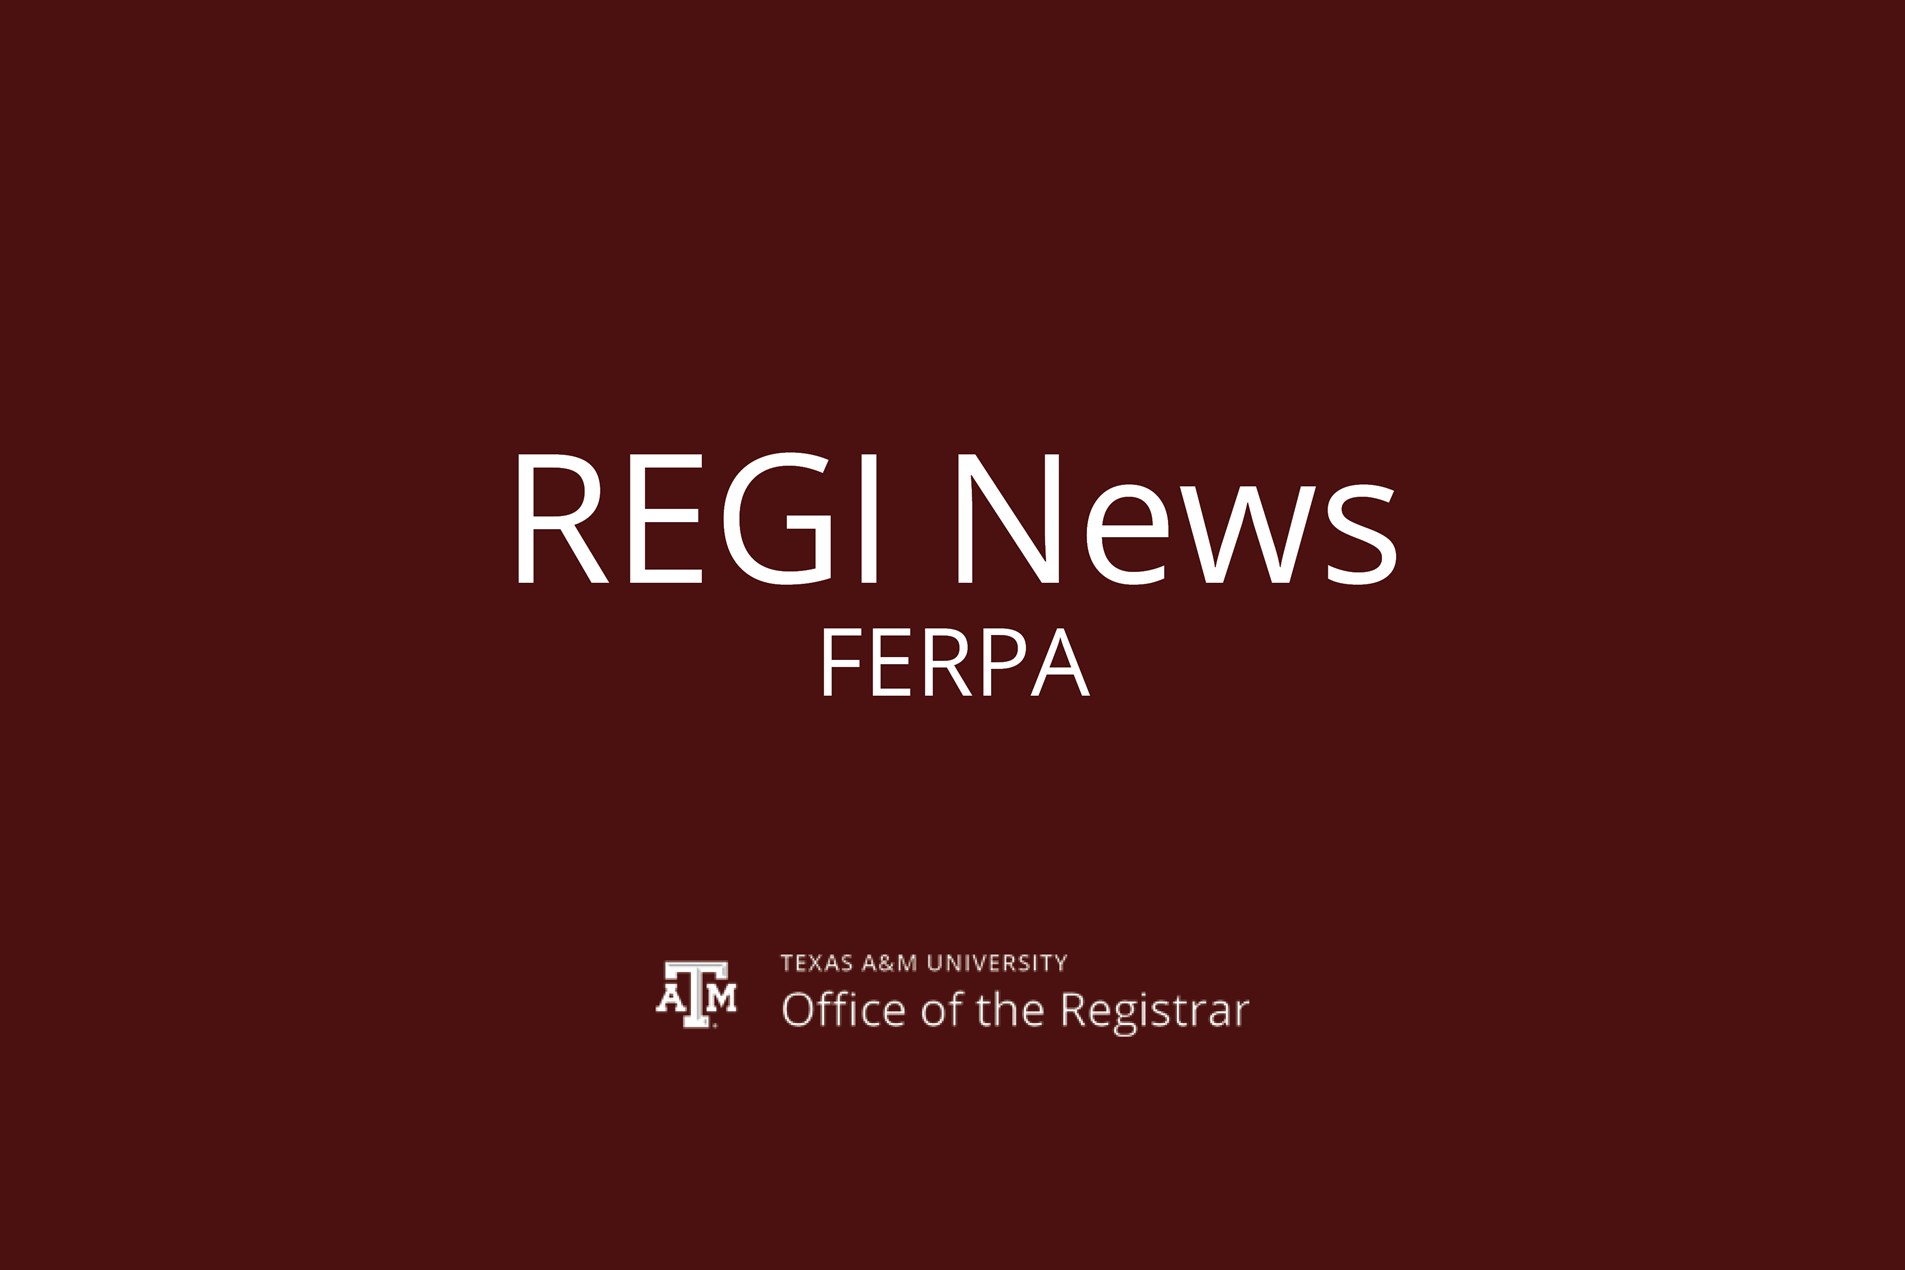 Friday Fun with FERPA, January 6, 2023 - Health and Safety Exception